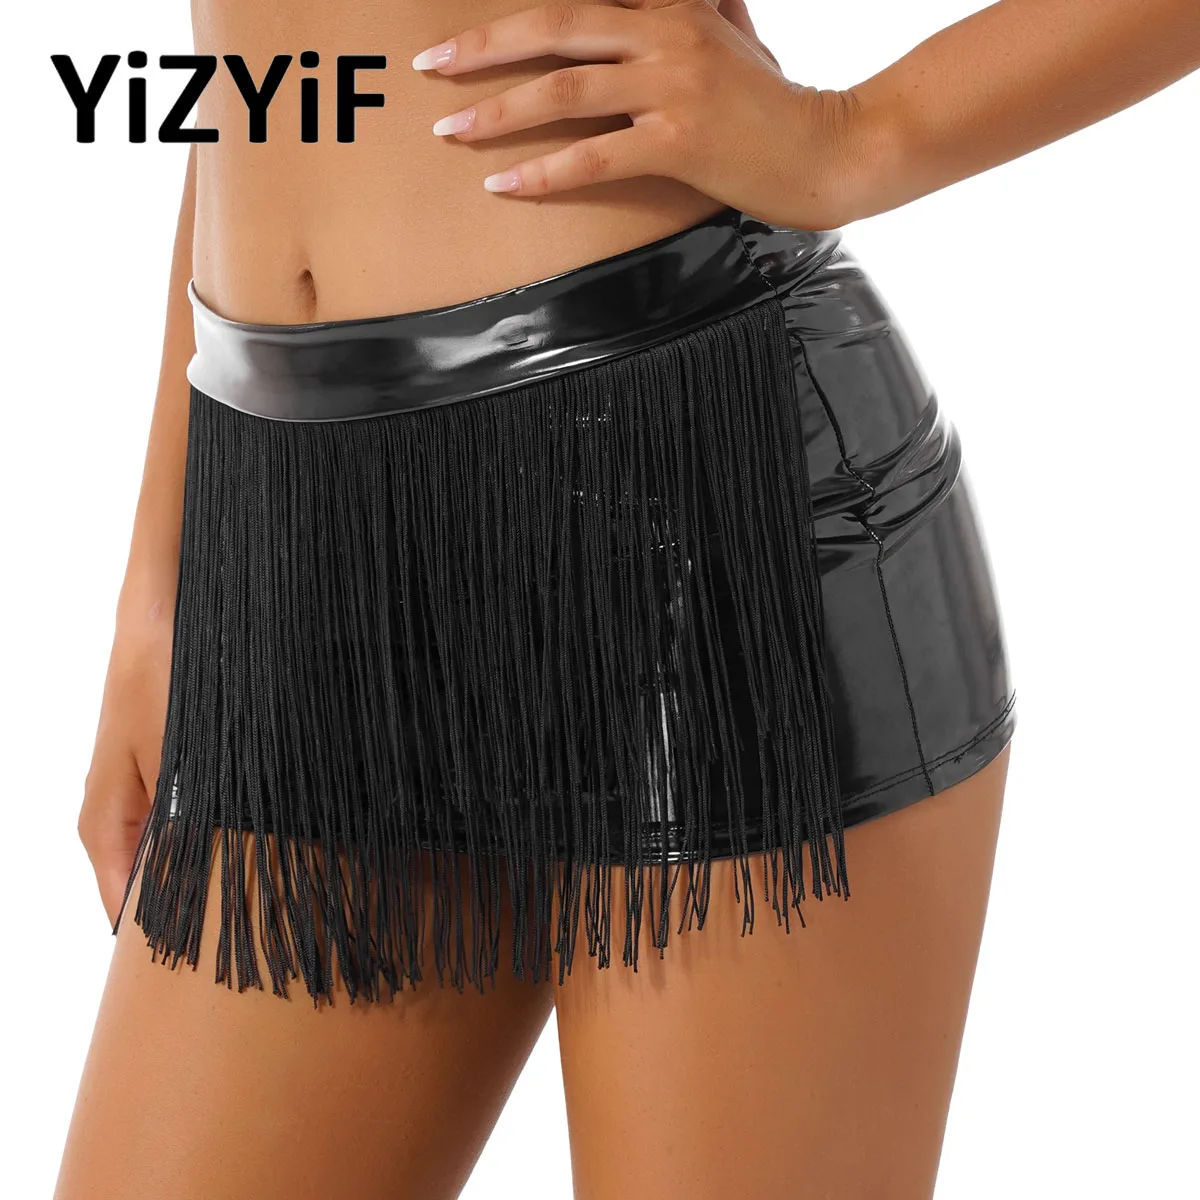 

Women Hot Sexy Patent Leather Fringed Bodycon Miniskirt Elastic Wet Look Clubwear Erotic Fantasy Tassel Skirt for Pole Dancing